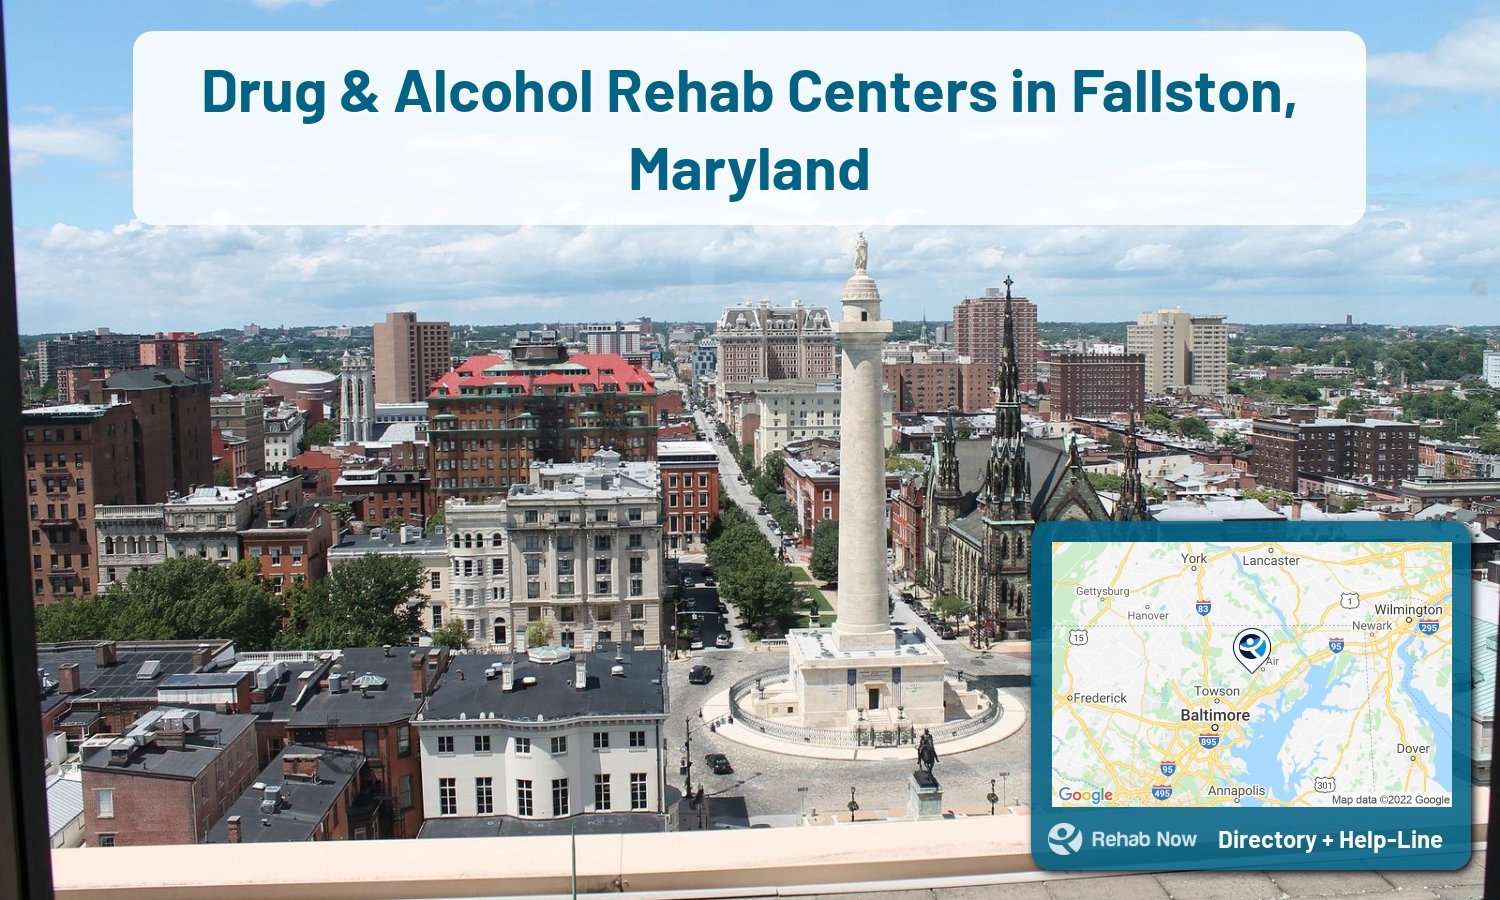 Let our expert counselors help find the best addiction treatment in Fallston, Maryland now with a free call to our hotline.